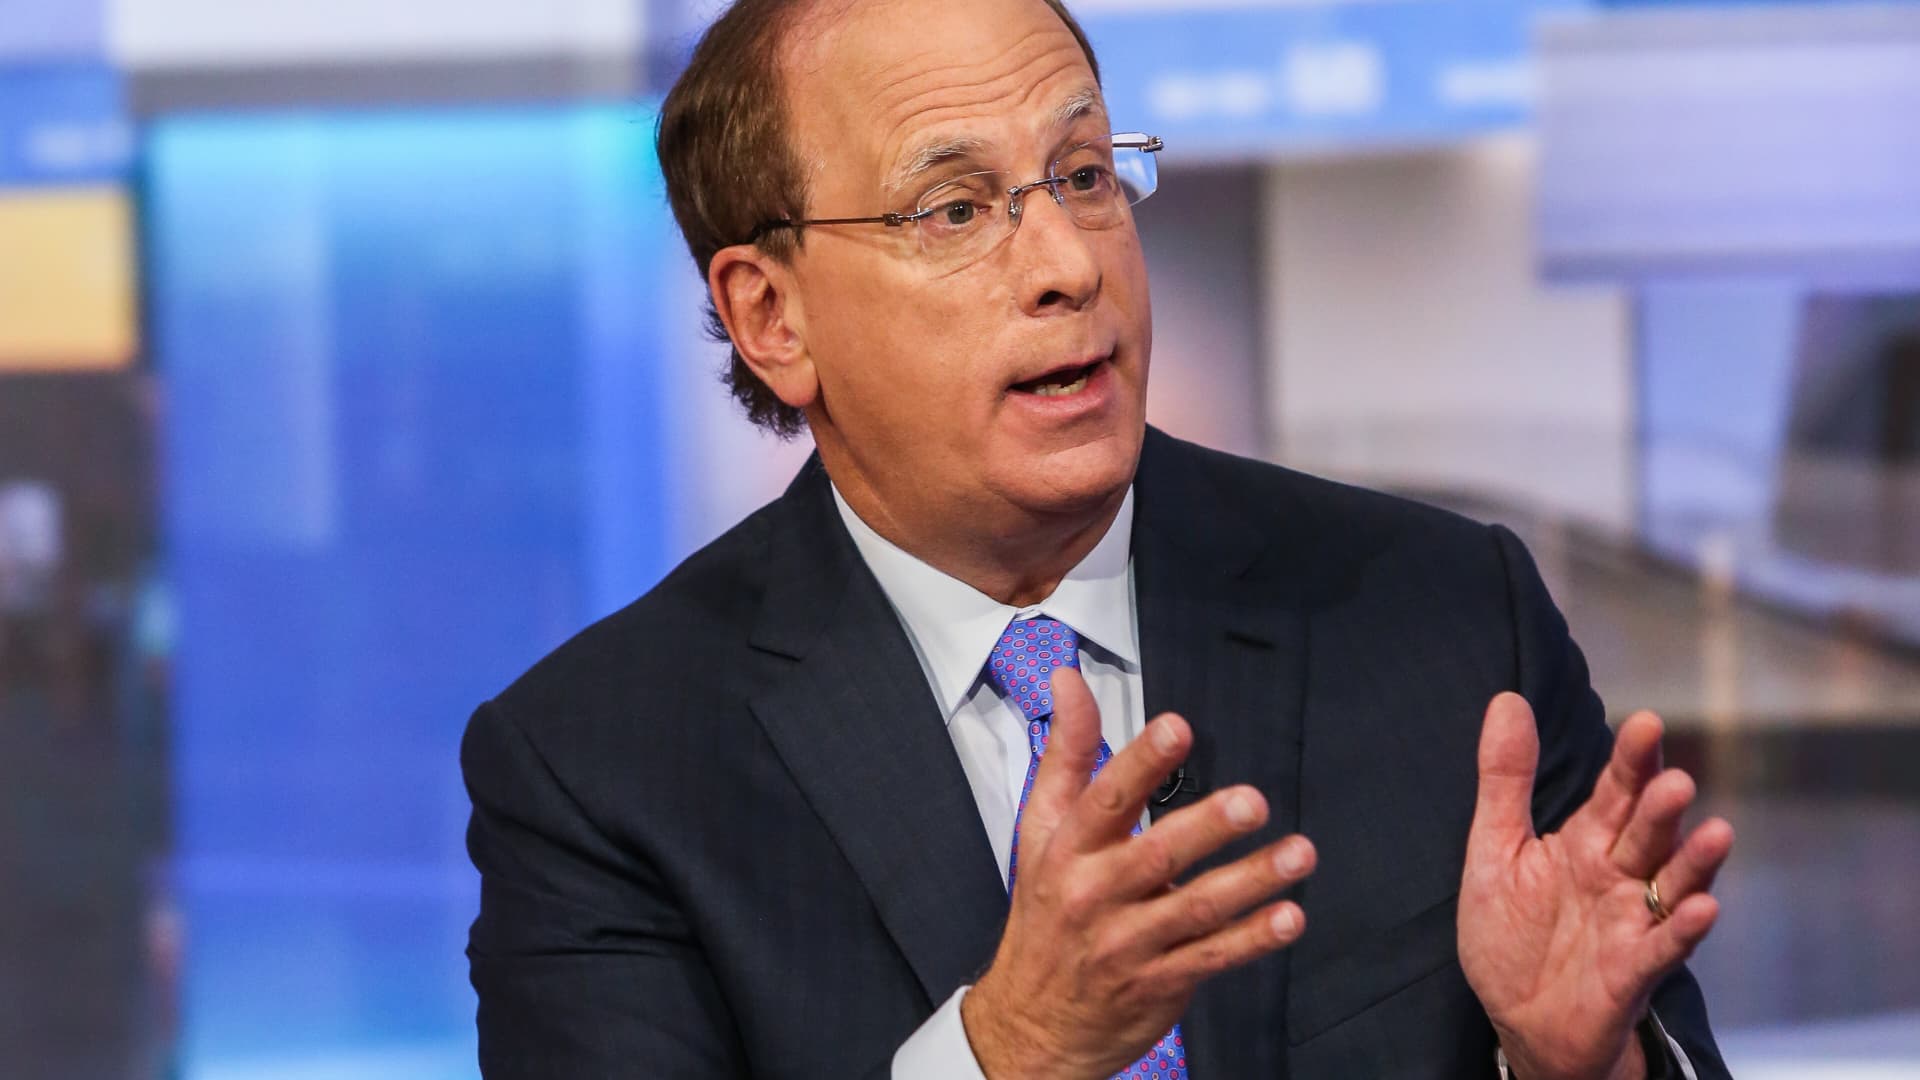 Stop panicking about inflation, BlackRock CEO tells investors — ‘We’re going to get through this’